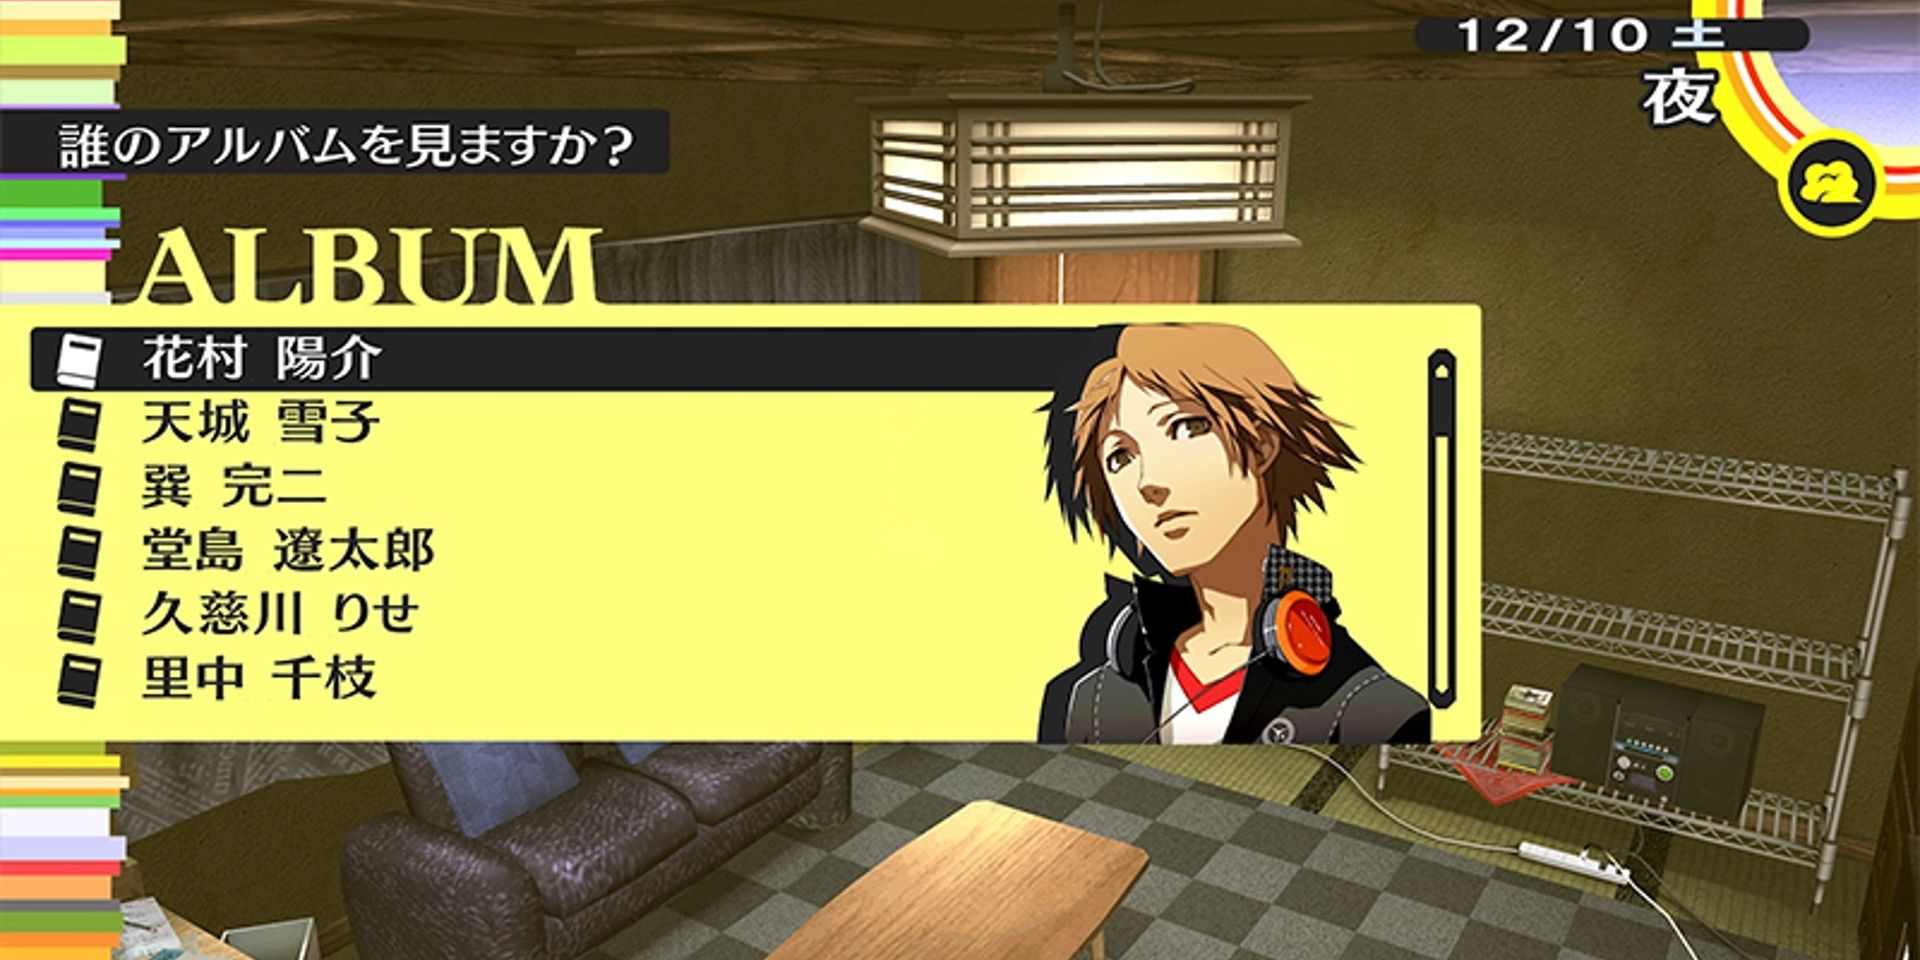 The Album feature showcasing Yosuke's Social Link in the Japanese langauge Persona 4 Golden